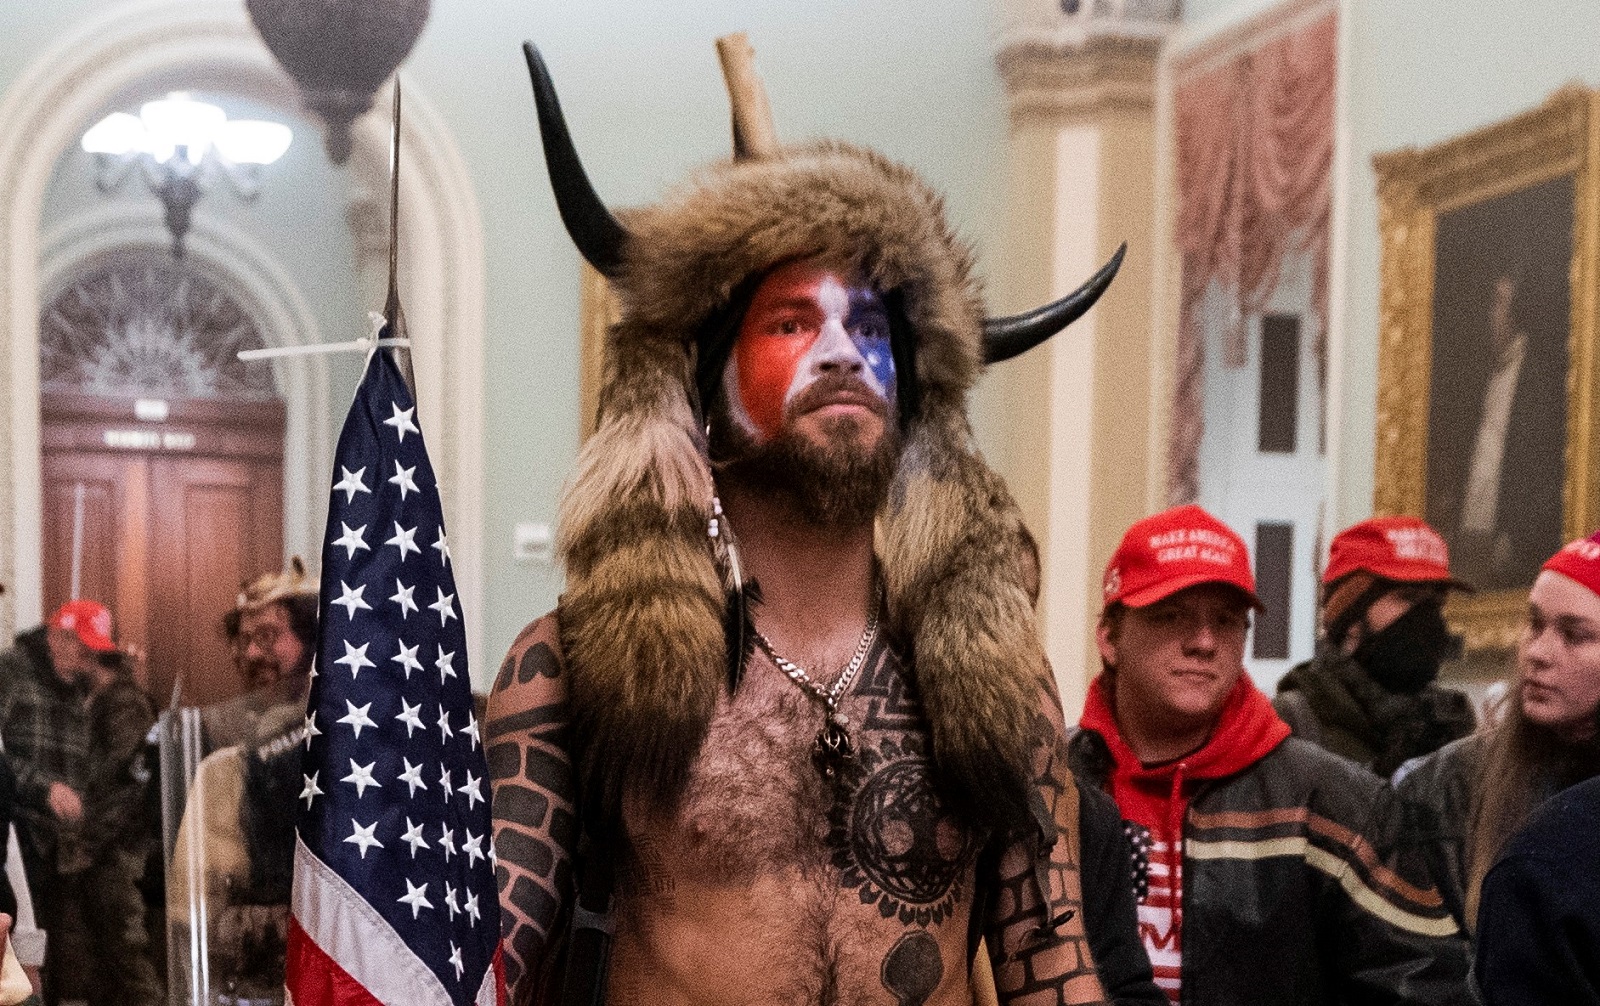 epa09587580 (FILE) - Supporters of US President Donald J. Trump, including 'QAnon Shaman' Jacob Anthony Angeli Chansley (C), stand by the door to the Senate chambers after they breached the US Capitol security in Washington, DC, USA, 06 January 2021 (reissued 17 November 2021). Chansley was sentenced to 41 months in prison on 17 November 2021 for his role in the 06 January 2021 breach of the Capitol.  EPA/JIM LO SCALZO